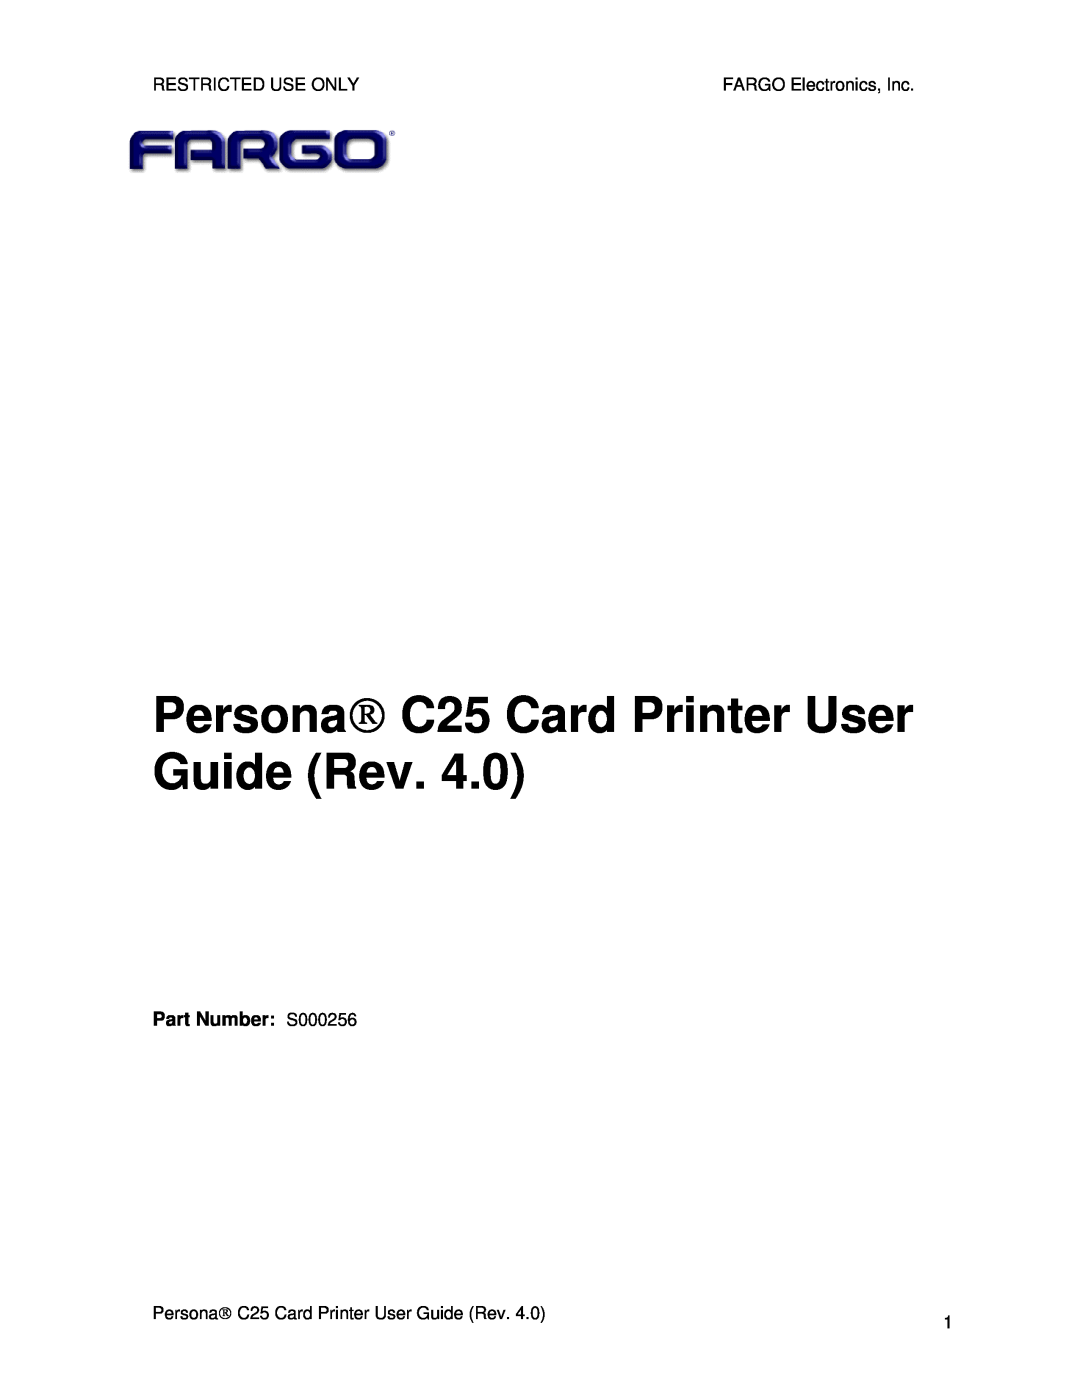 FARGO electronic manual Persona→ C25 Card Printer User Guide Rev, Part Number S000256, Restricted Use Only 